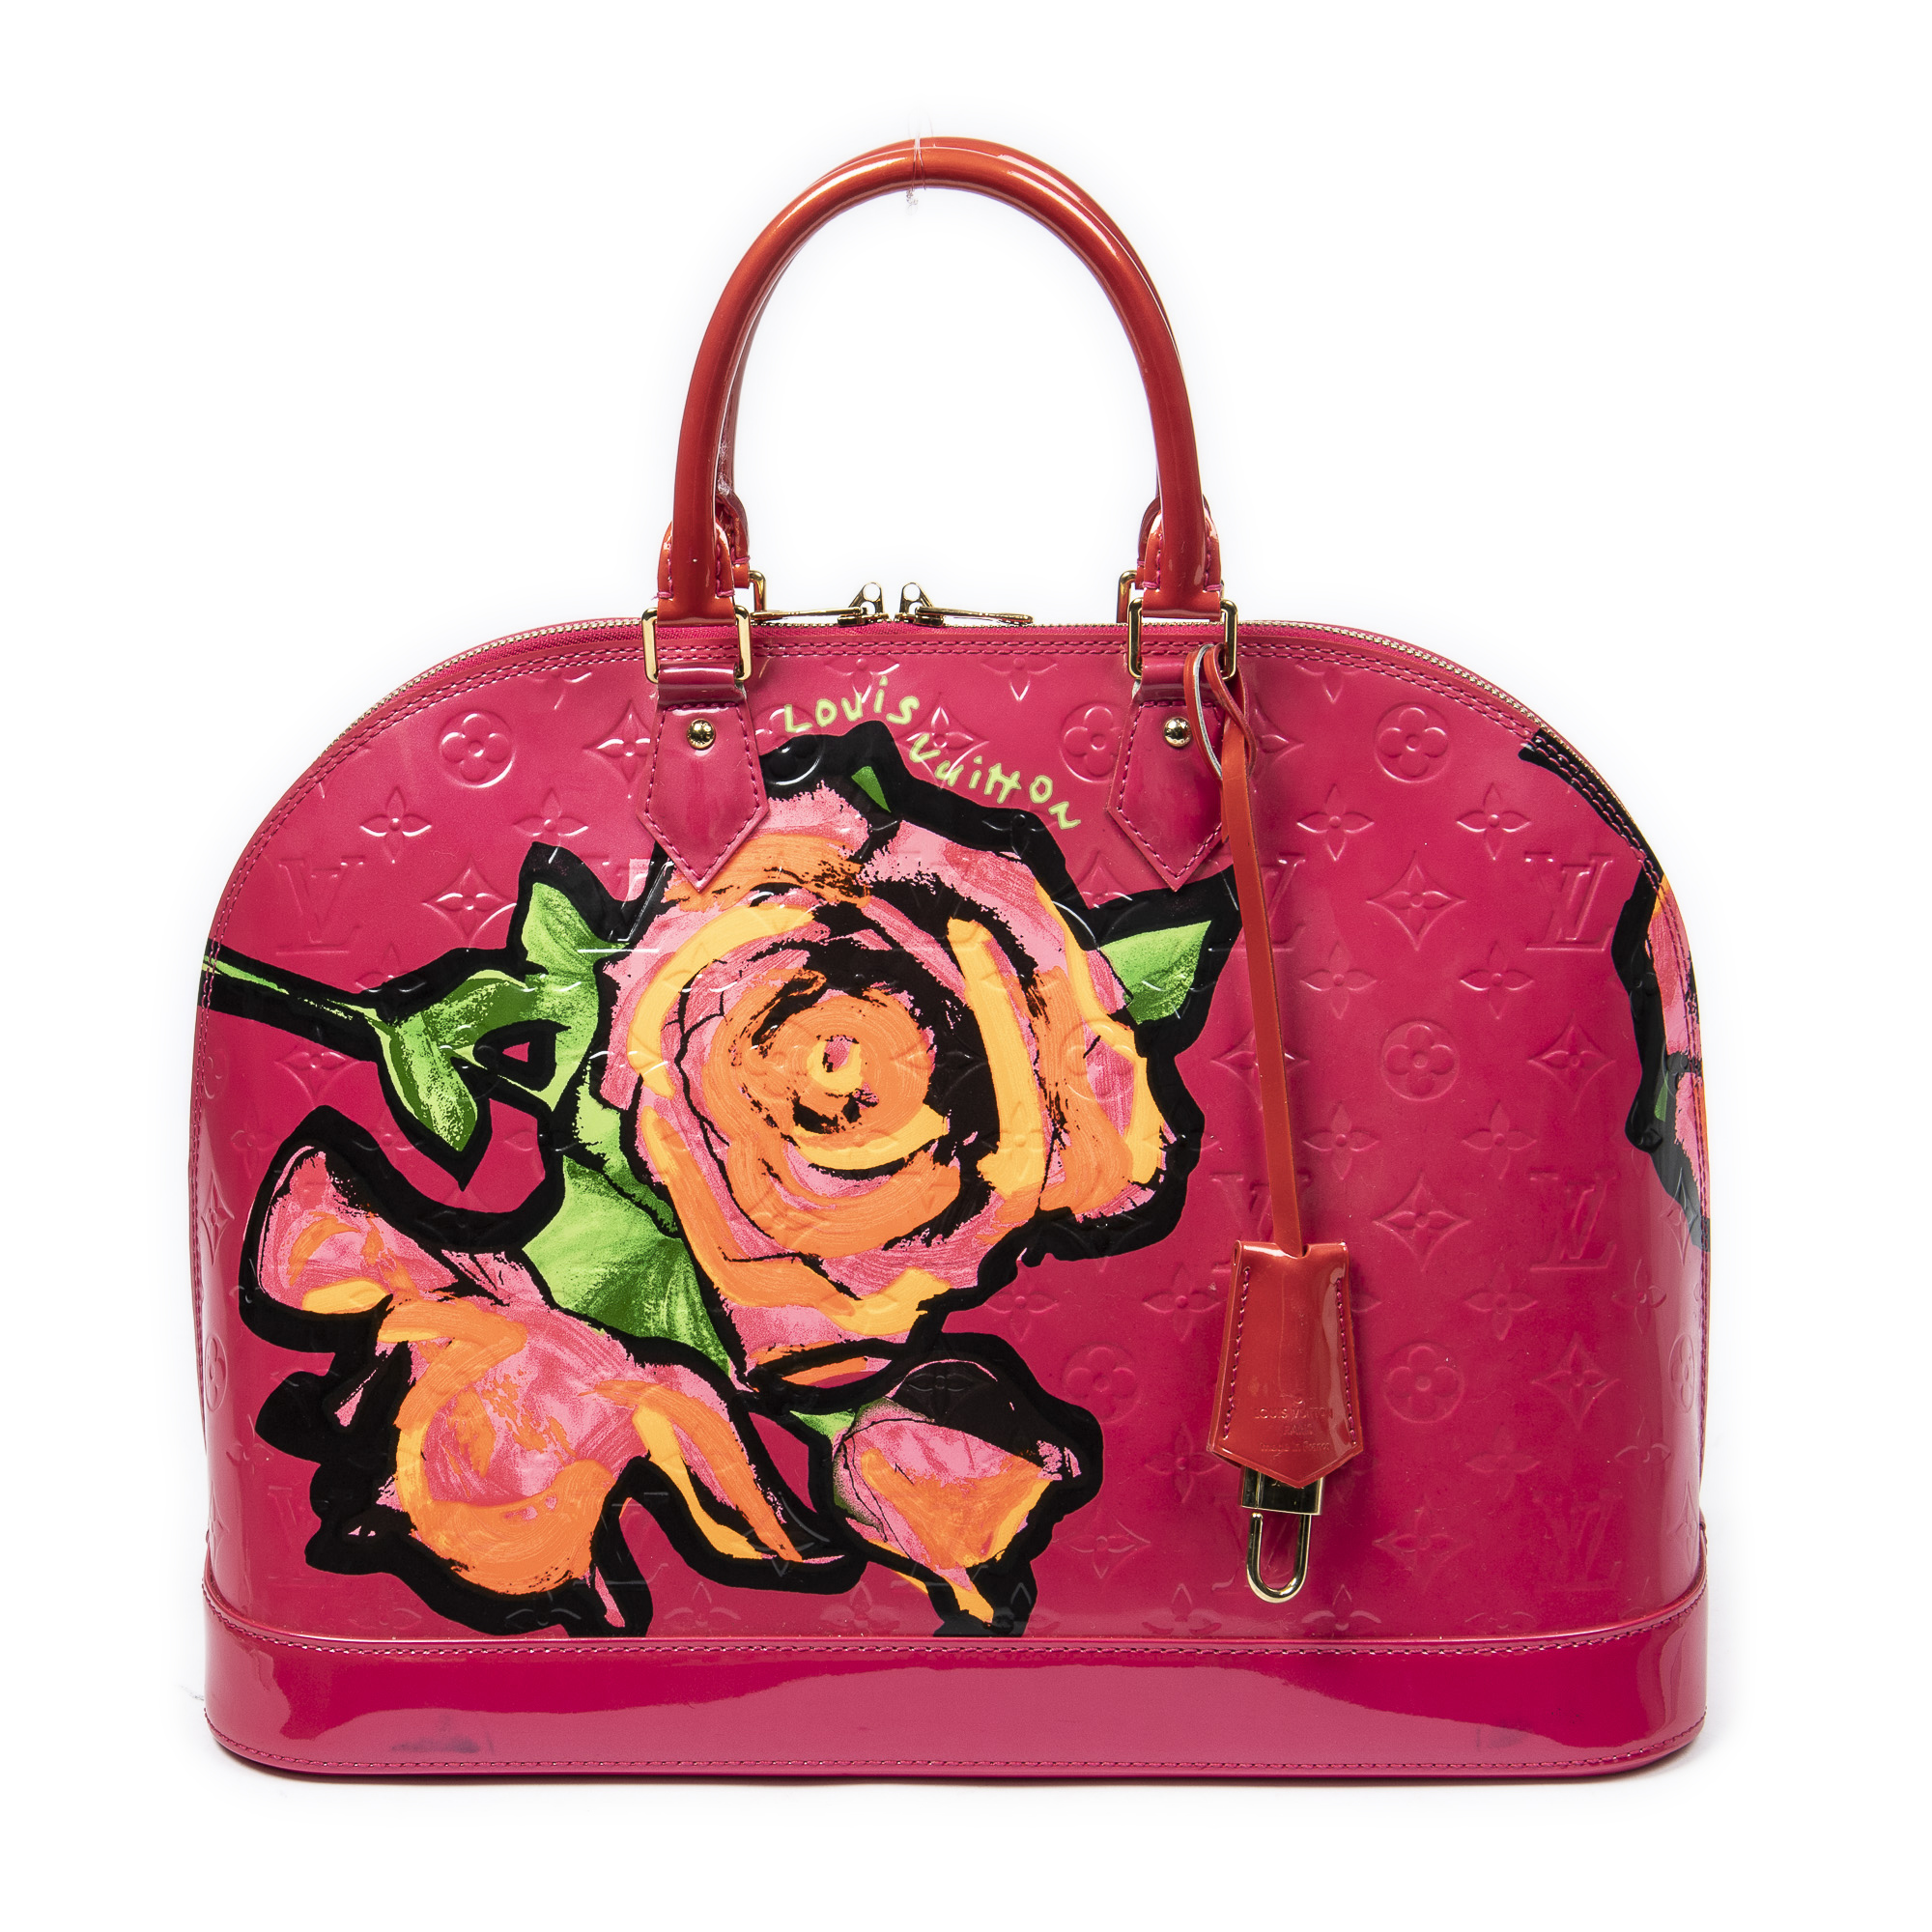 Louis Vuitton x Stephen Sprouse Monogram Vernis Roses Collection 